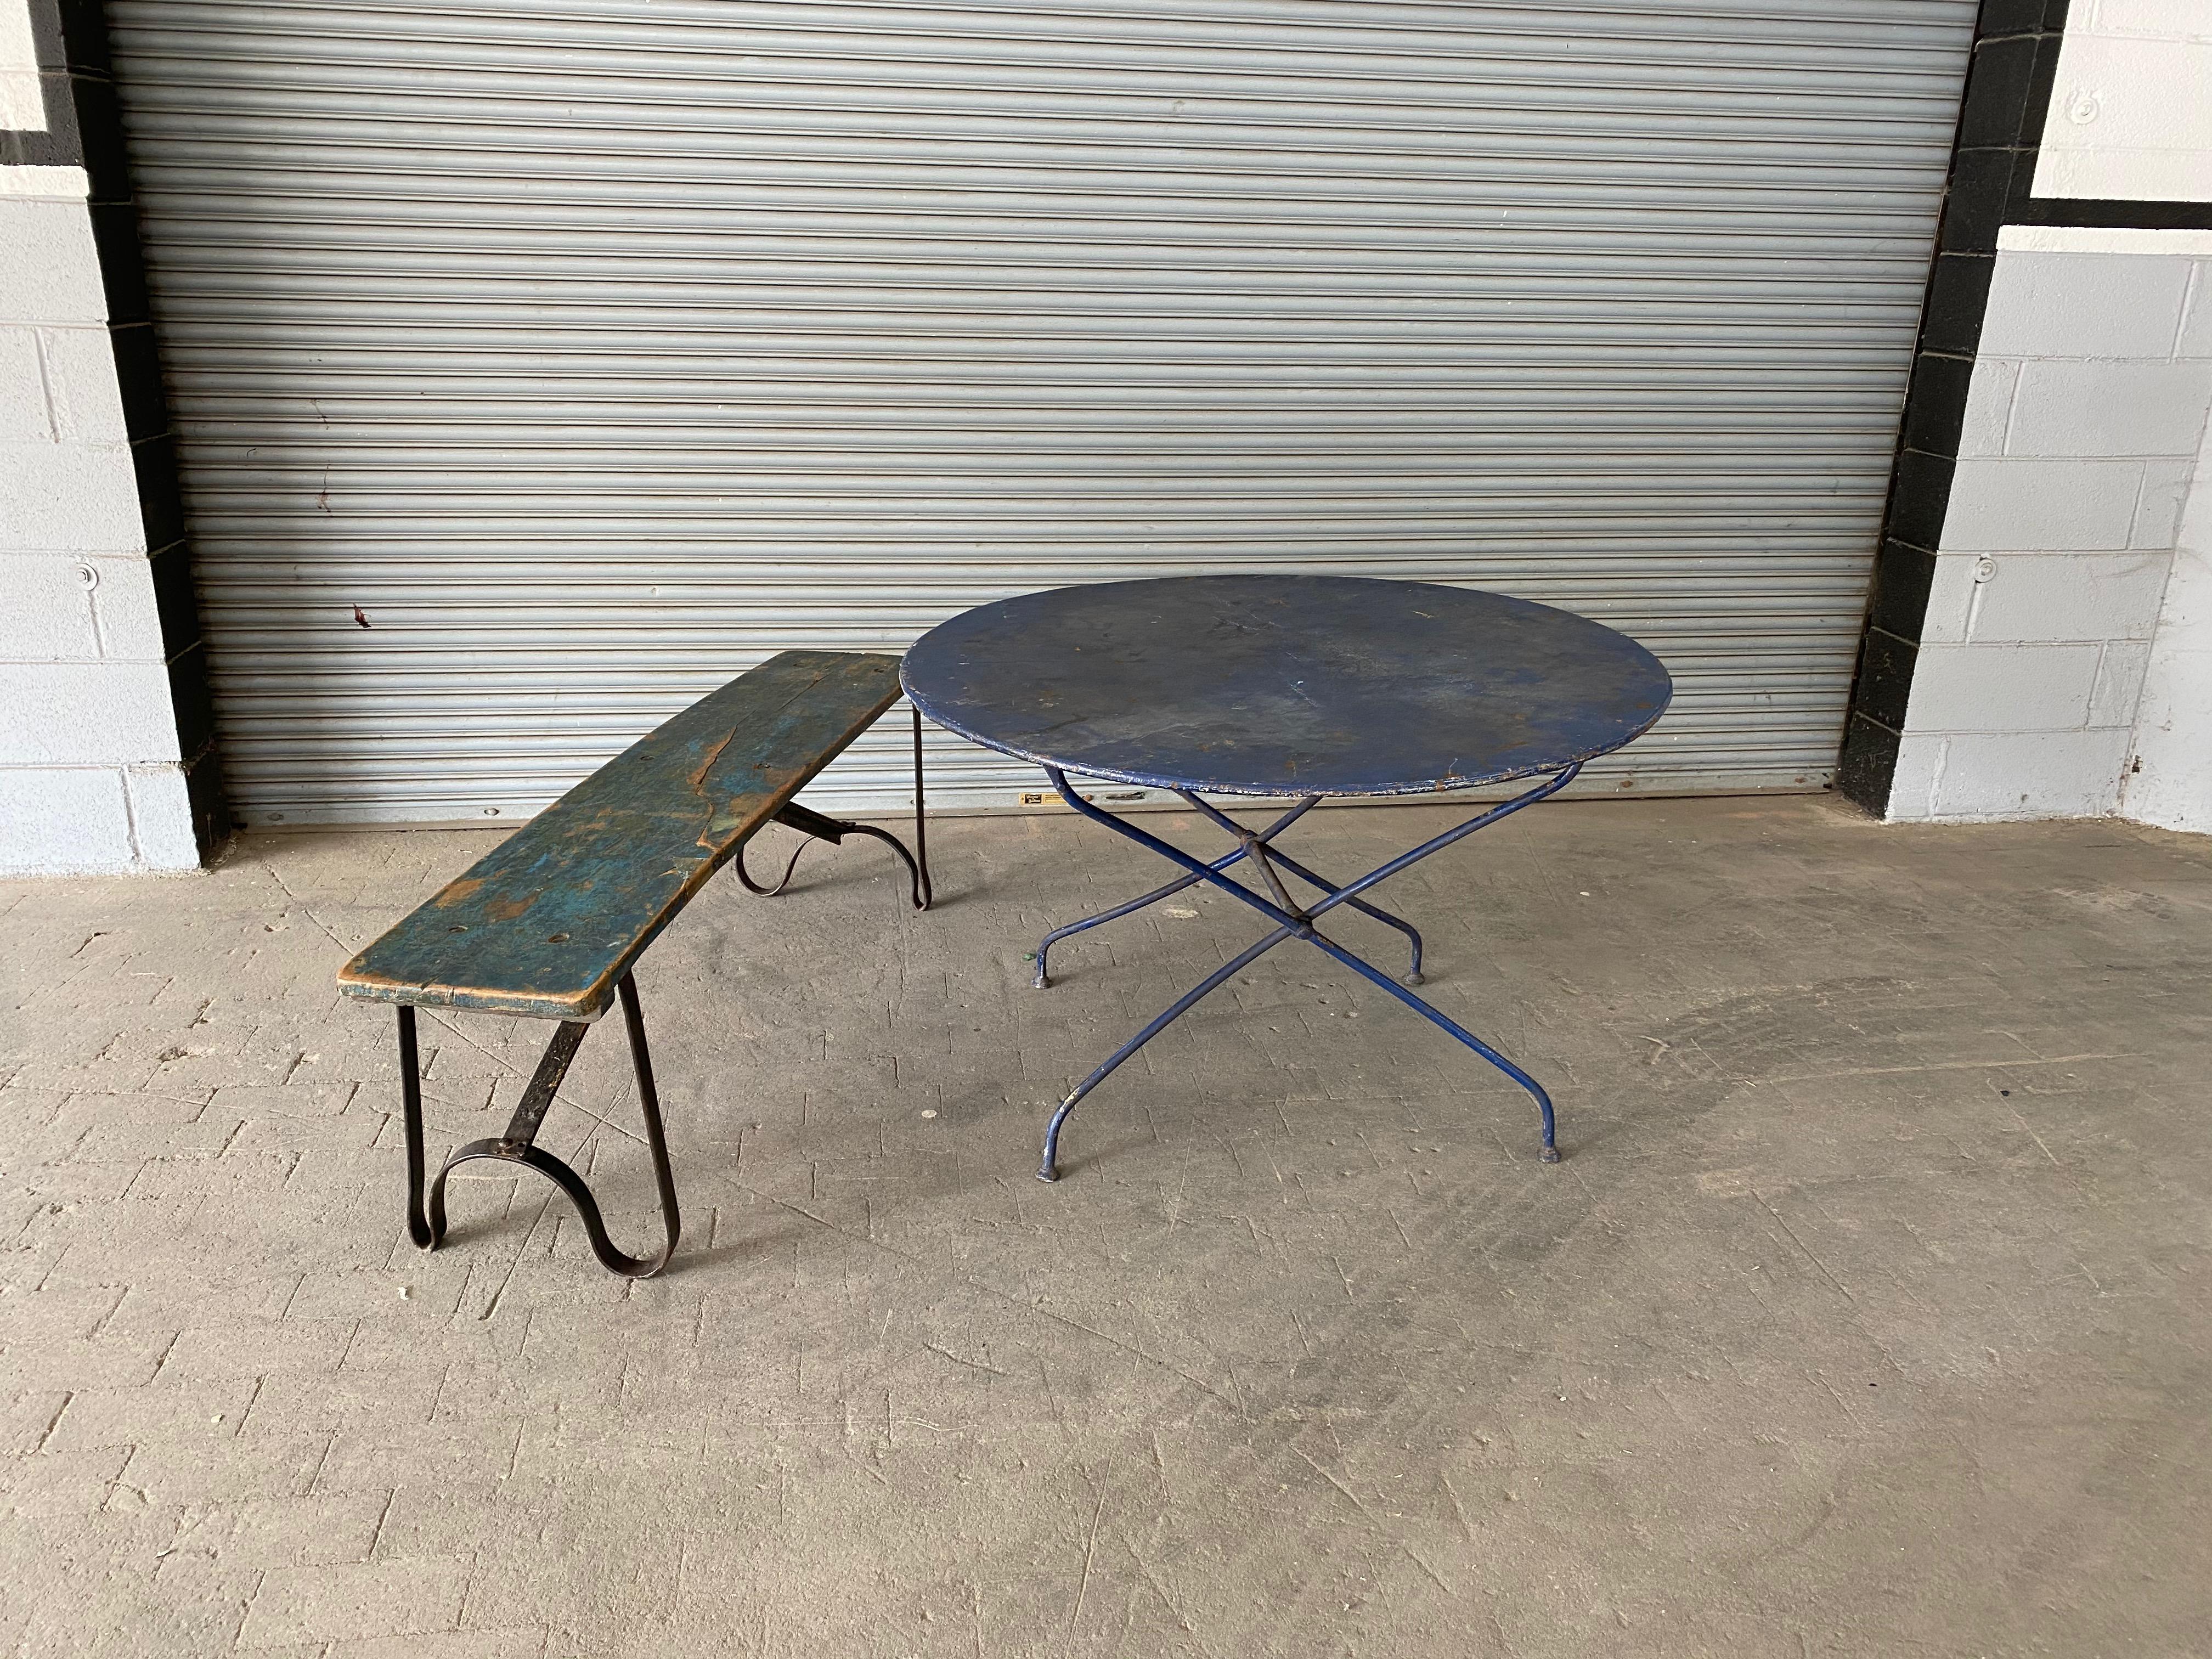 A French 1920s industrial wood bench with a curved iron base. Make a bold impression in any space with this stunning French industrial wood bench from the 1920s. This sturdy piece features a curved iron base and a beautiful wooden top with a